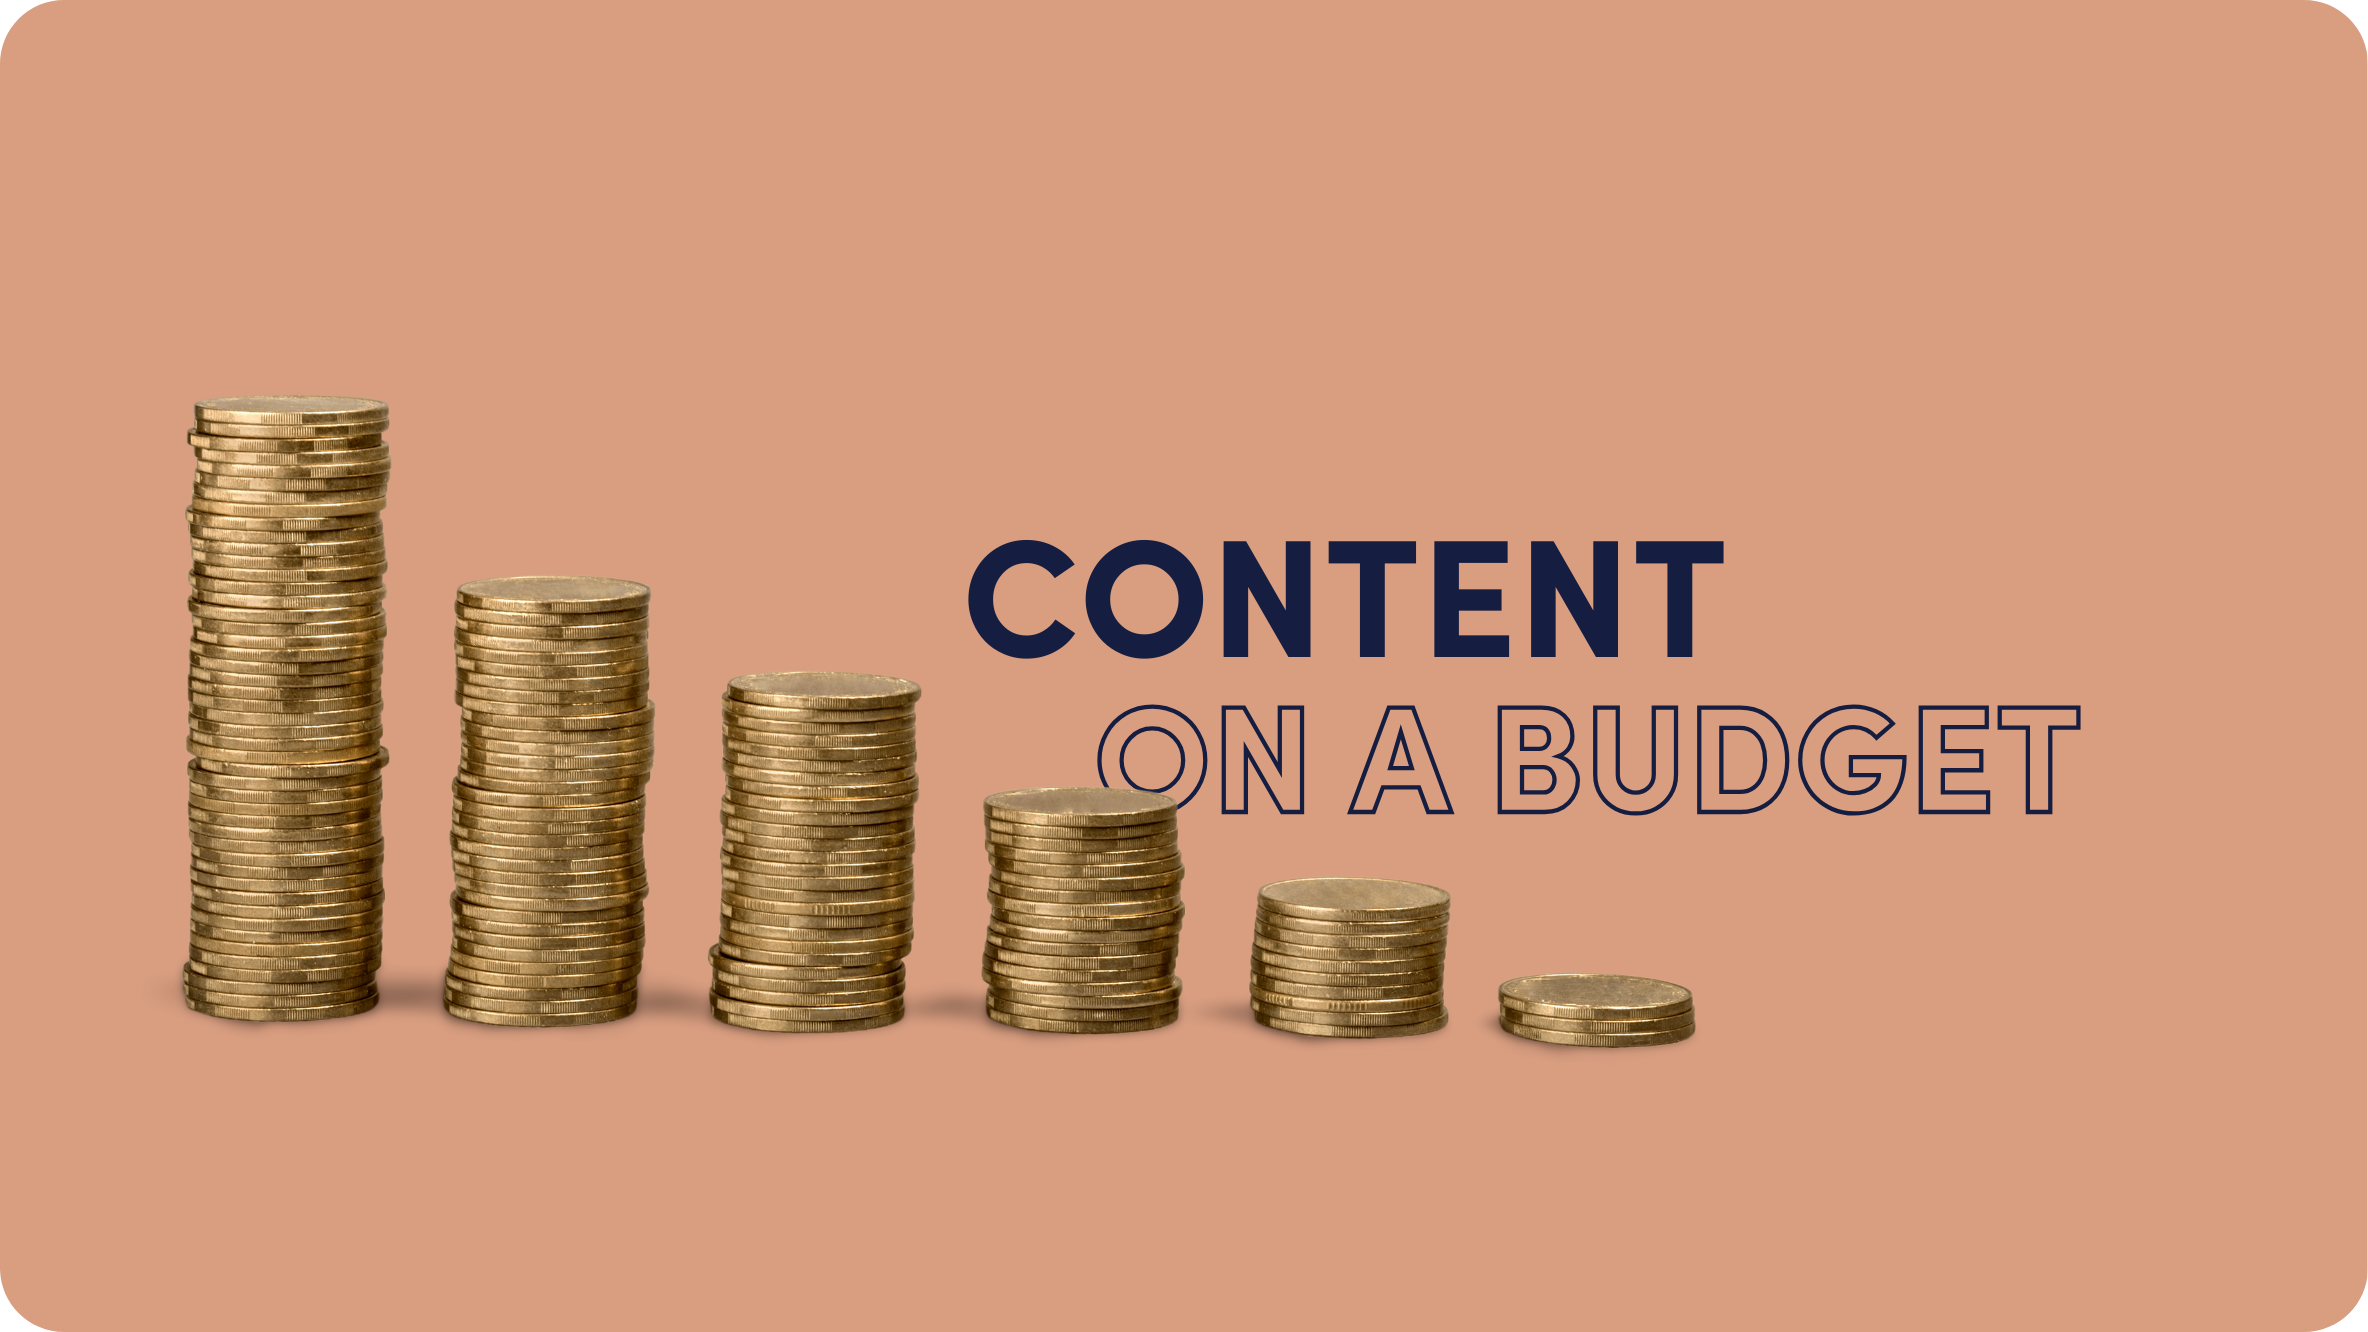 How to Save Money on Content Creation: 12 Cost-Effective Tips